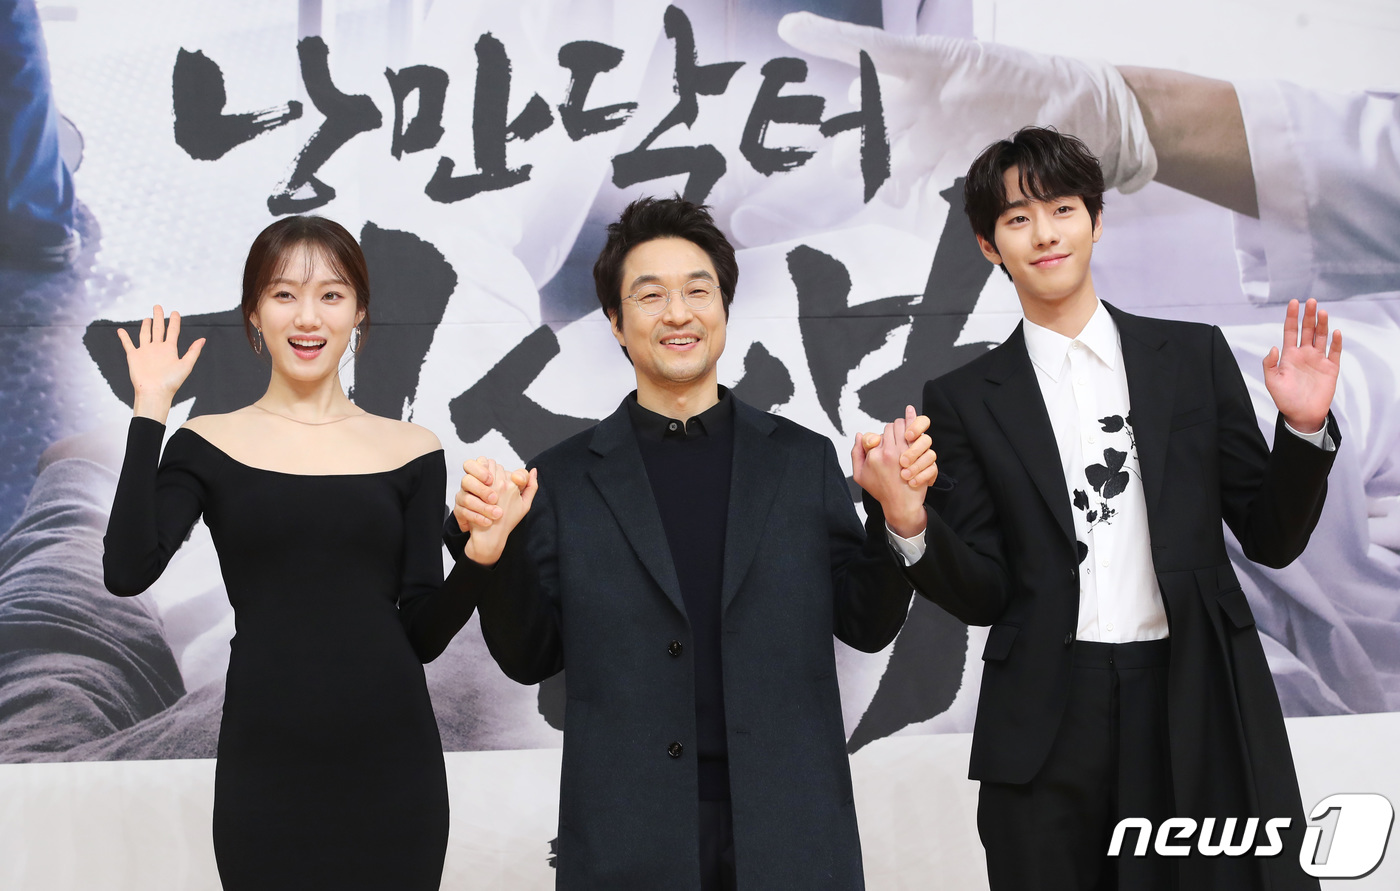 Seoul=) = Ahn Hyo-seop praised Lee Sung-kyung for his co-work.SBS New Moonwha drama Romantic Doctor Kim Sabu 2 (playplayplay by Kang Eun-kyung/directed by Yoo In-sik) introduced the drama with a production presentation at SBS office in Mok-dong, Seoul, at 2 p.m. on the 6th.Lee Sung-kyung will go to the second year of the thoracic surgeon fellow, Cha Eun-jae, who has been stepping as an elite in the praise and expectation of the surroundings, listening to the genius of studying since childhood in Romantic Doctor Kim Sabu Season 2.Ahn Hyo-seop played the role of Seo Woo Jin, a natural surgical genius surgeon fellow who was written to eat and live in Romantic Doctor Kim Sabu Season 2.In the drama, Seo Woo Jin is cynical and uninteresting in everything, but only when he is in the operating room, he shines with tremendous concentration and sensitive hands.Seo Woo Jin, who had no money and everything was tight, went to Doldam Hospital with an accidental opportunity and met Kim Sabu and changed his life.Two of them make a tit-for-tat chemistry.Lee Sung-kyung has a good energy and plays an energizer-like role in the field, said Ahn Hyo-seop, referring to his co-work with Lee Sung-kyung. It seems to have a positive effect and act comfortably.In fact, I dont remember that Im Acting. My seniors said its good to act like that. Im shooting happily, he said.Lee Sung-kyung responded by saying, I received the best praise; Hyo-seop works hard next to me, and I am an actor that gives good stimulation, and I am so good as a partner.Romantic Doctor Kim Sabu 2 is a story of real doctor in the background of a poor stone wall hospital in the province. It contains the contents of meeting the geek genius doctor Kim Sabu and going to the real romance of life and running fiercely.Kang Eun-kyung, director Yoo In-sik, and Han Seok-gyu of Romantic Doctor Kim Sabu 1 broadcasted in 2016 coincided again.Ahn Hyo-seop and Lee Sung-kyung join in to complete the human healing story.The first broadcast at 9:40 p.m. on the 6th.